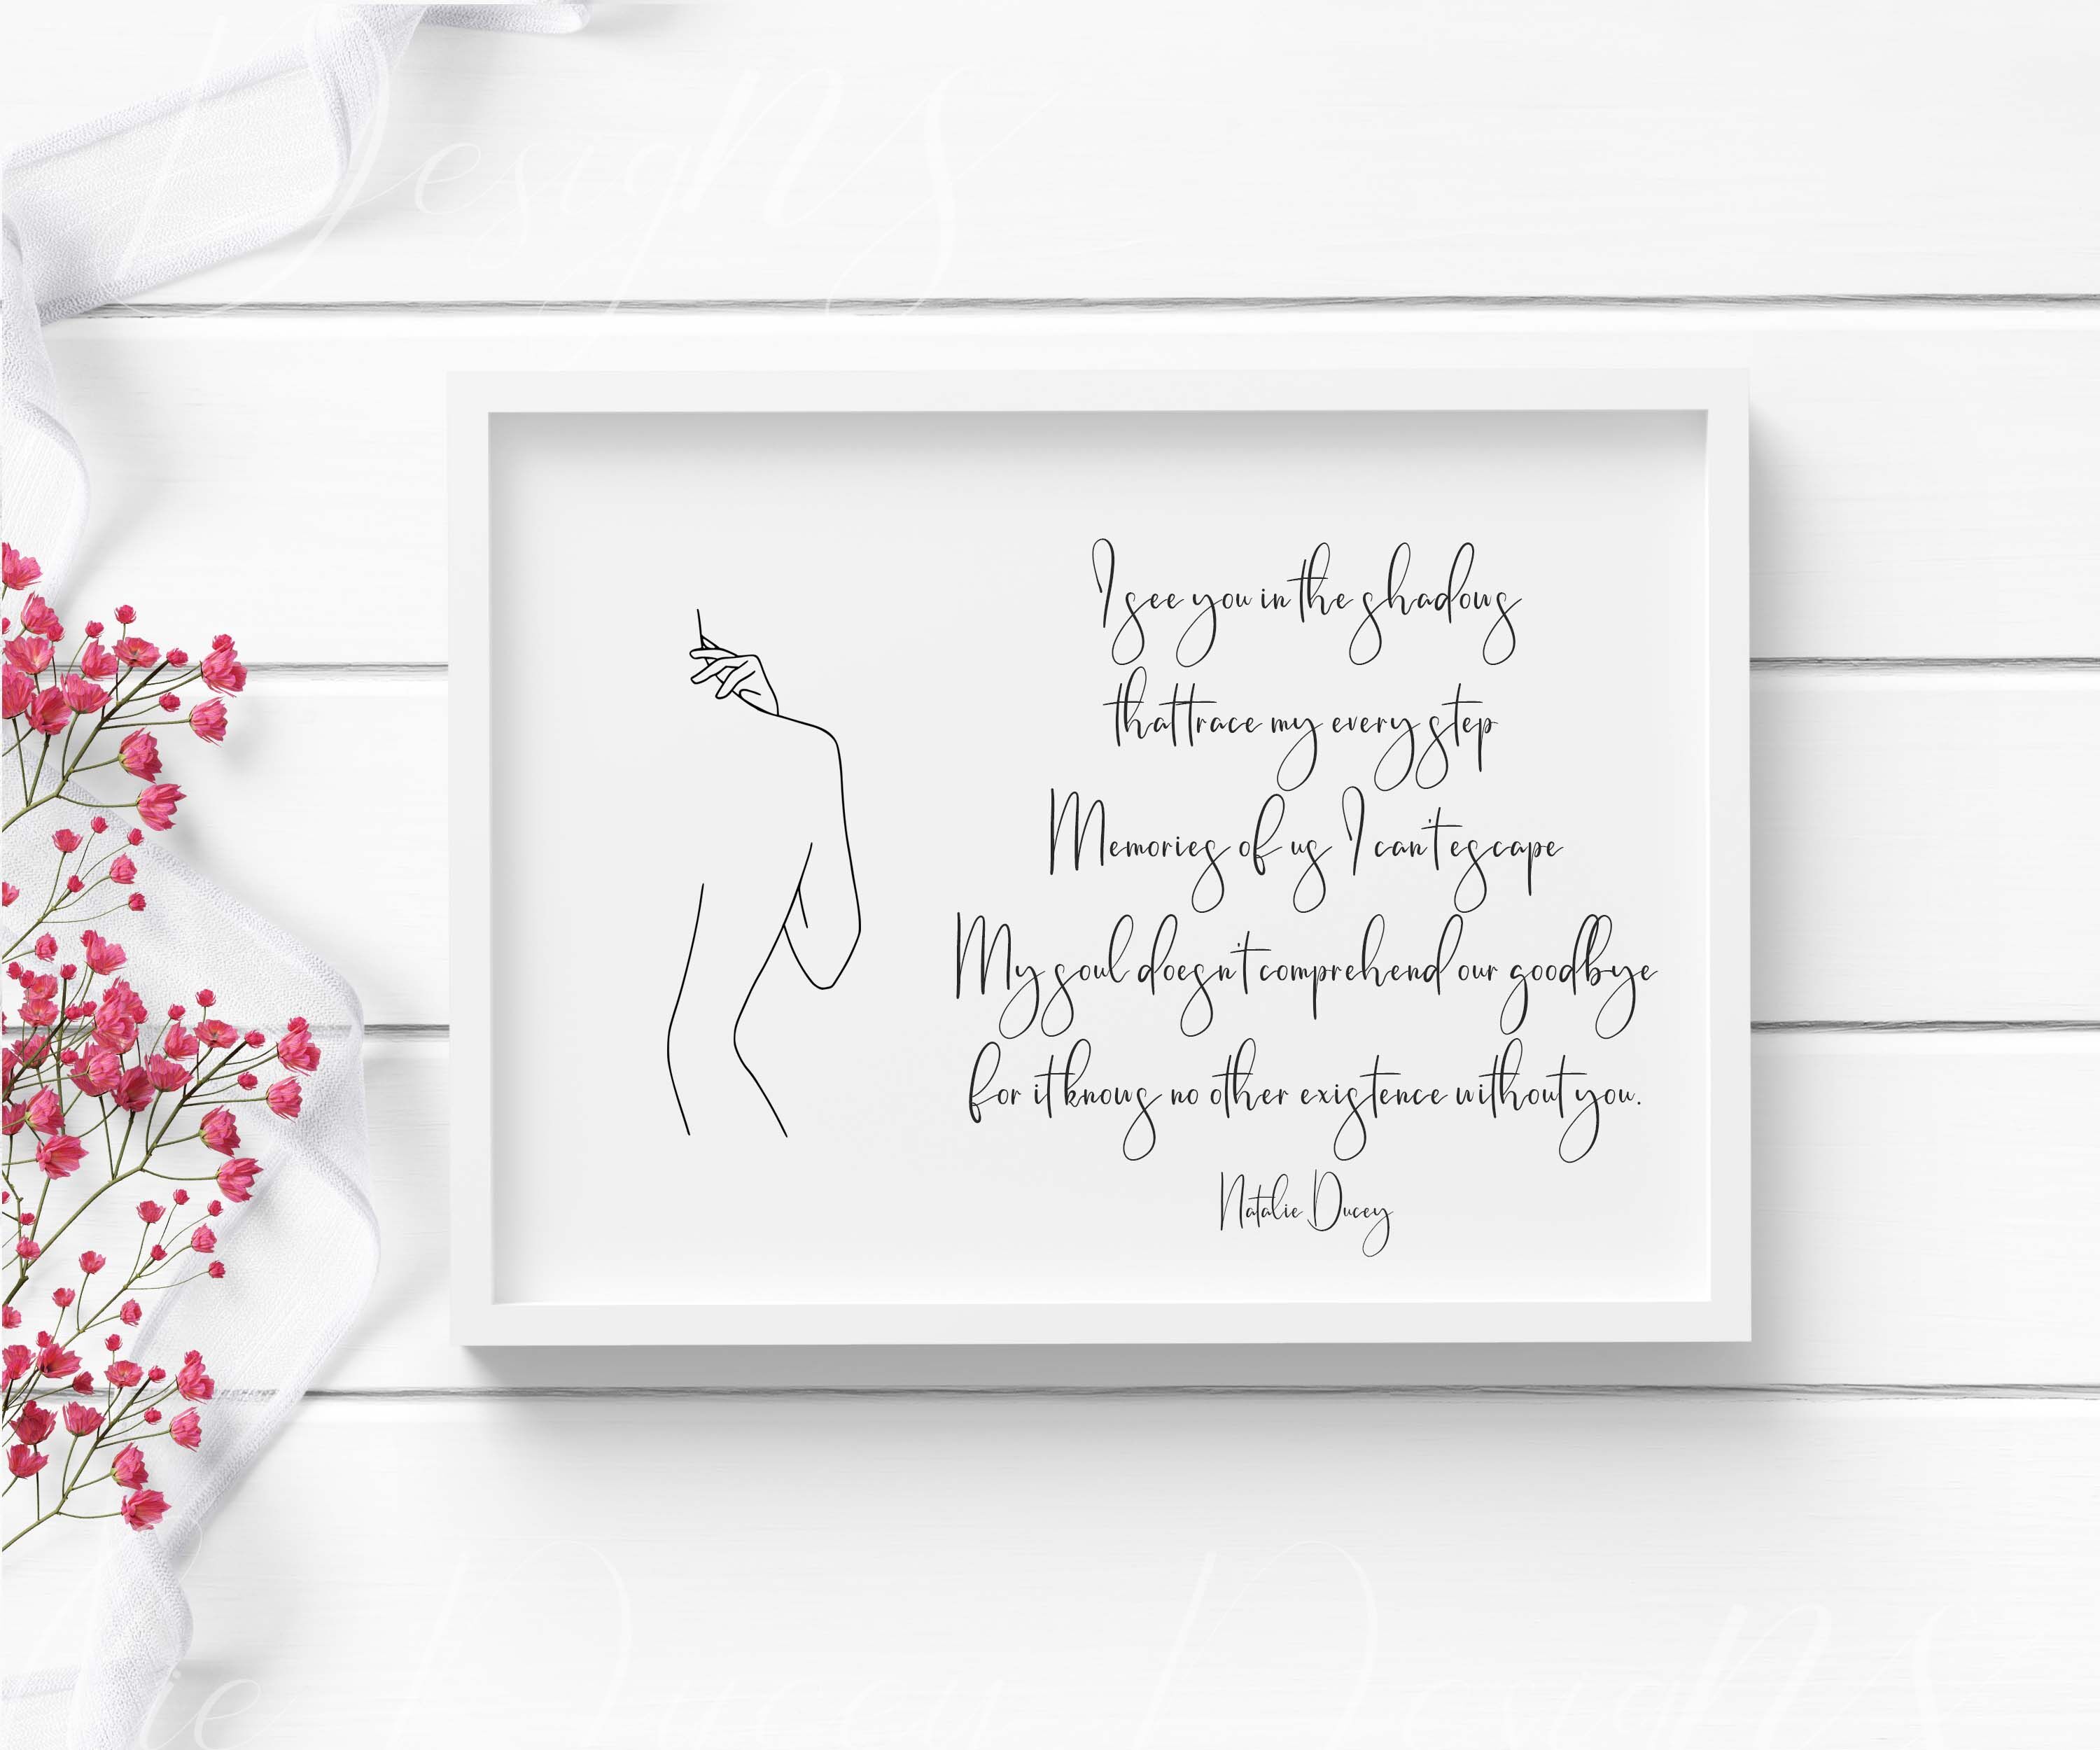 Download 5x7 White Frame Mockup With White Ribbon Red Flowers On White Wood By Natalie Ducey Graphic Design Thehungryjpeg Com PSD Mockup Templates